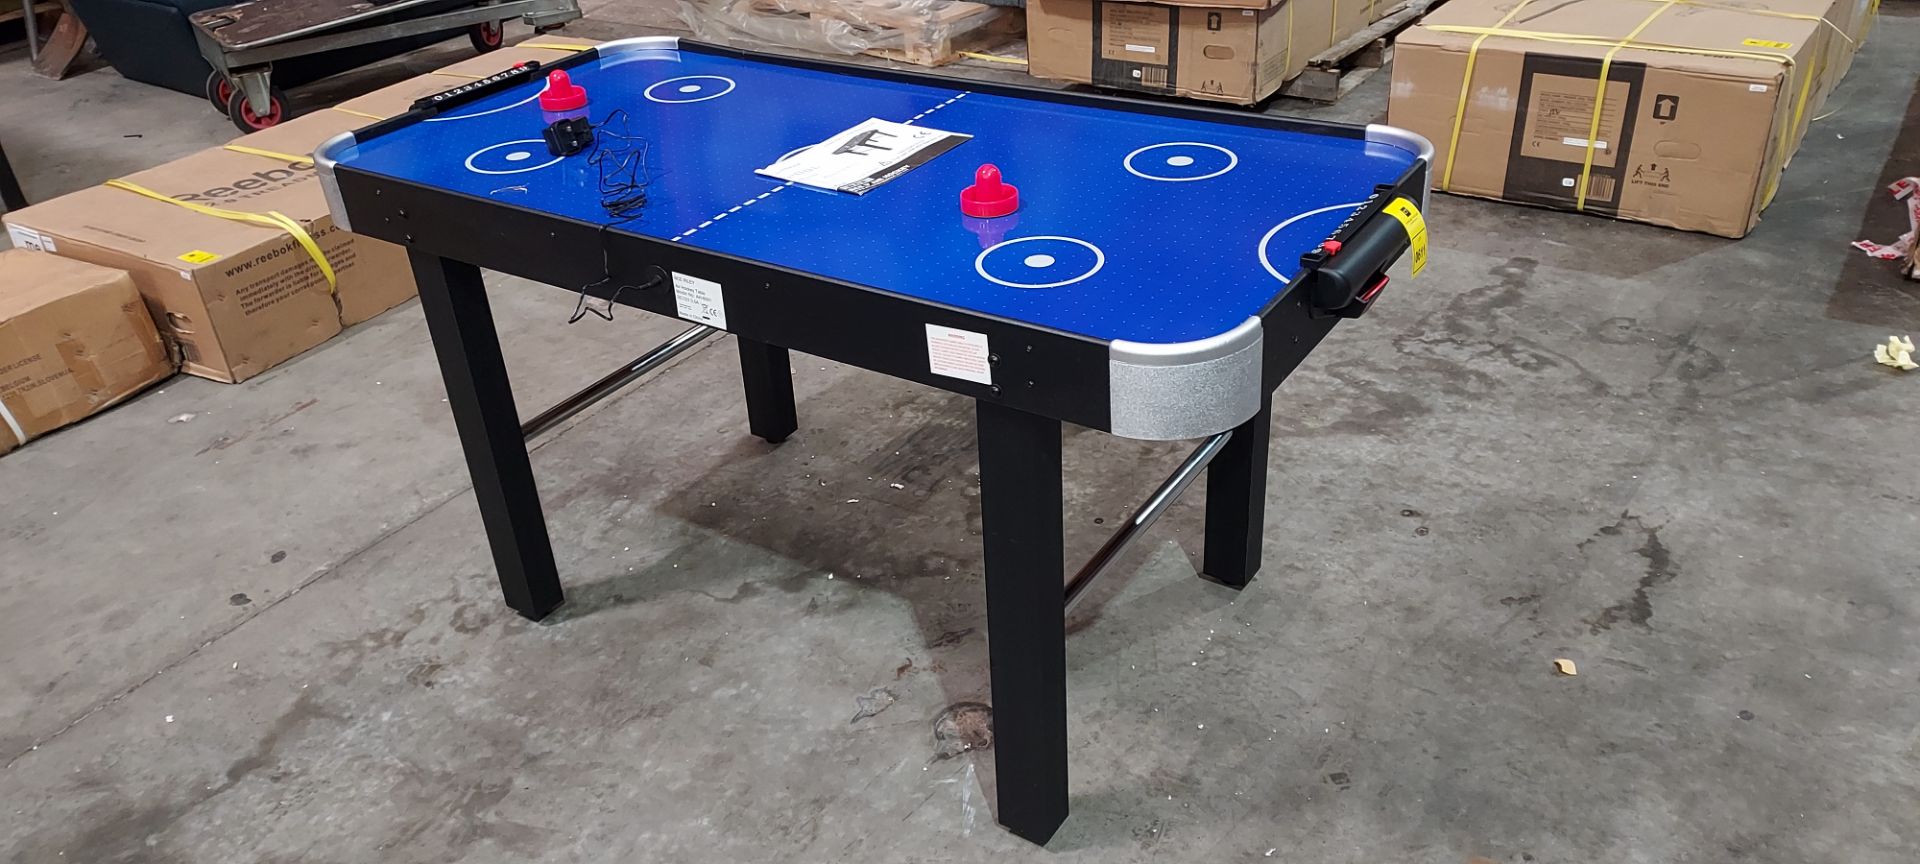 1 X BUILT BCE RILEY 5 FT AIR HOCKEY TABLE - INCLUDES FAN / 2 PUCKS / 2 PUSHERS ( PLEASE NOTE THIS IS